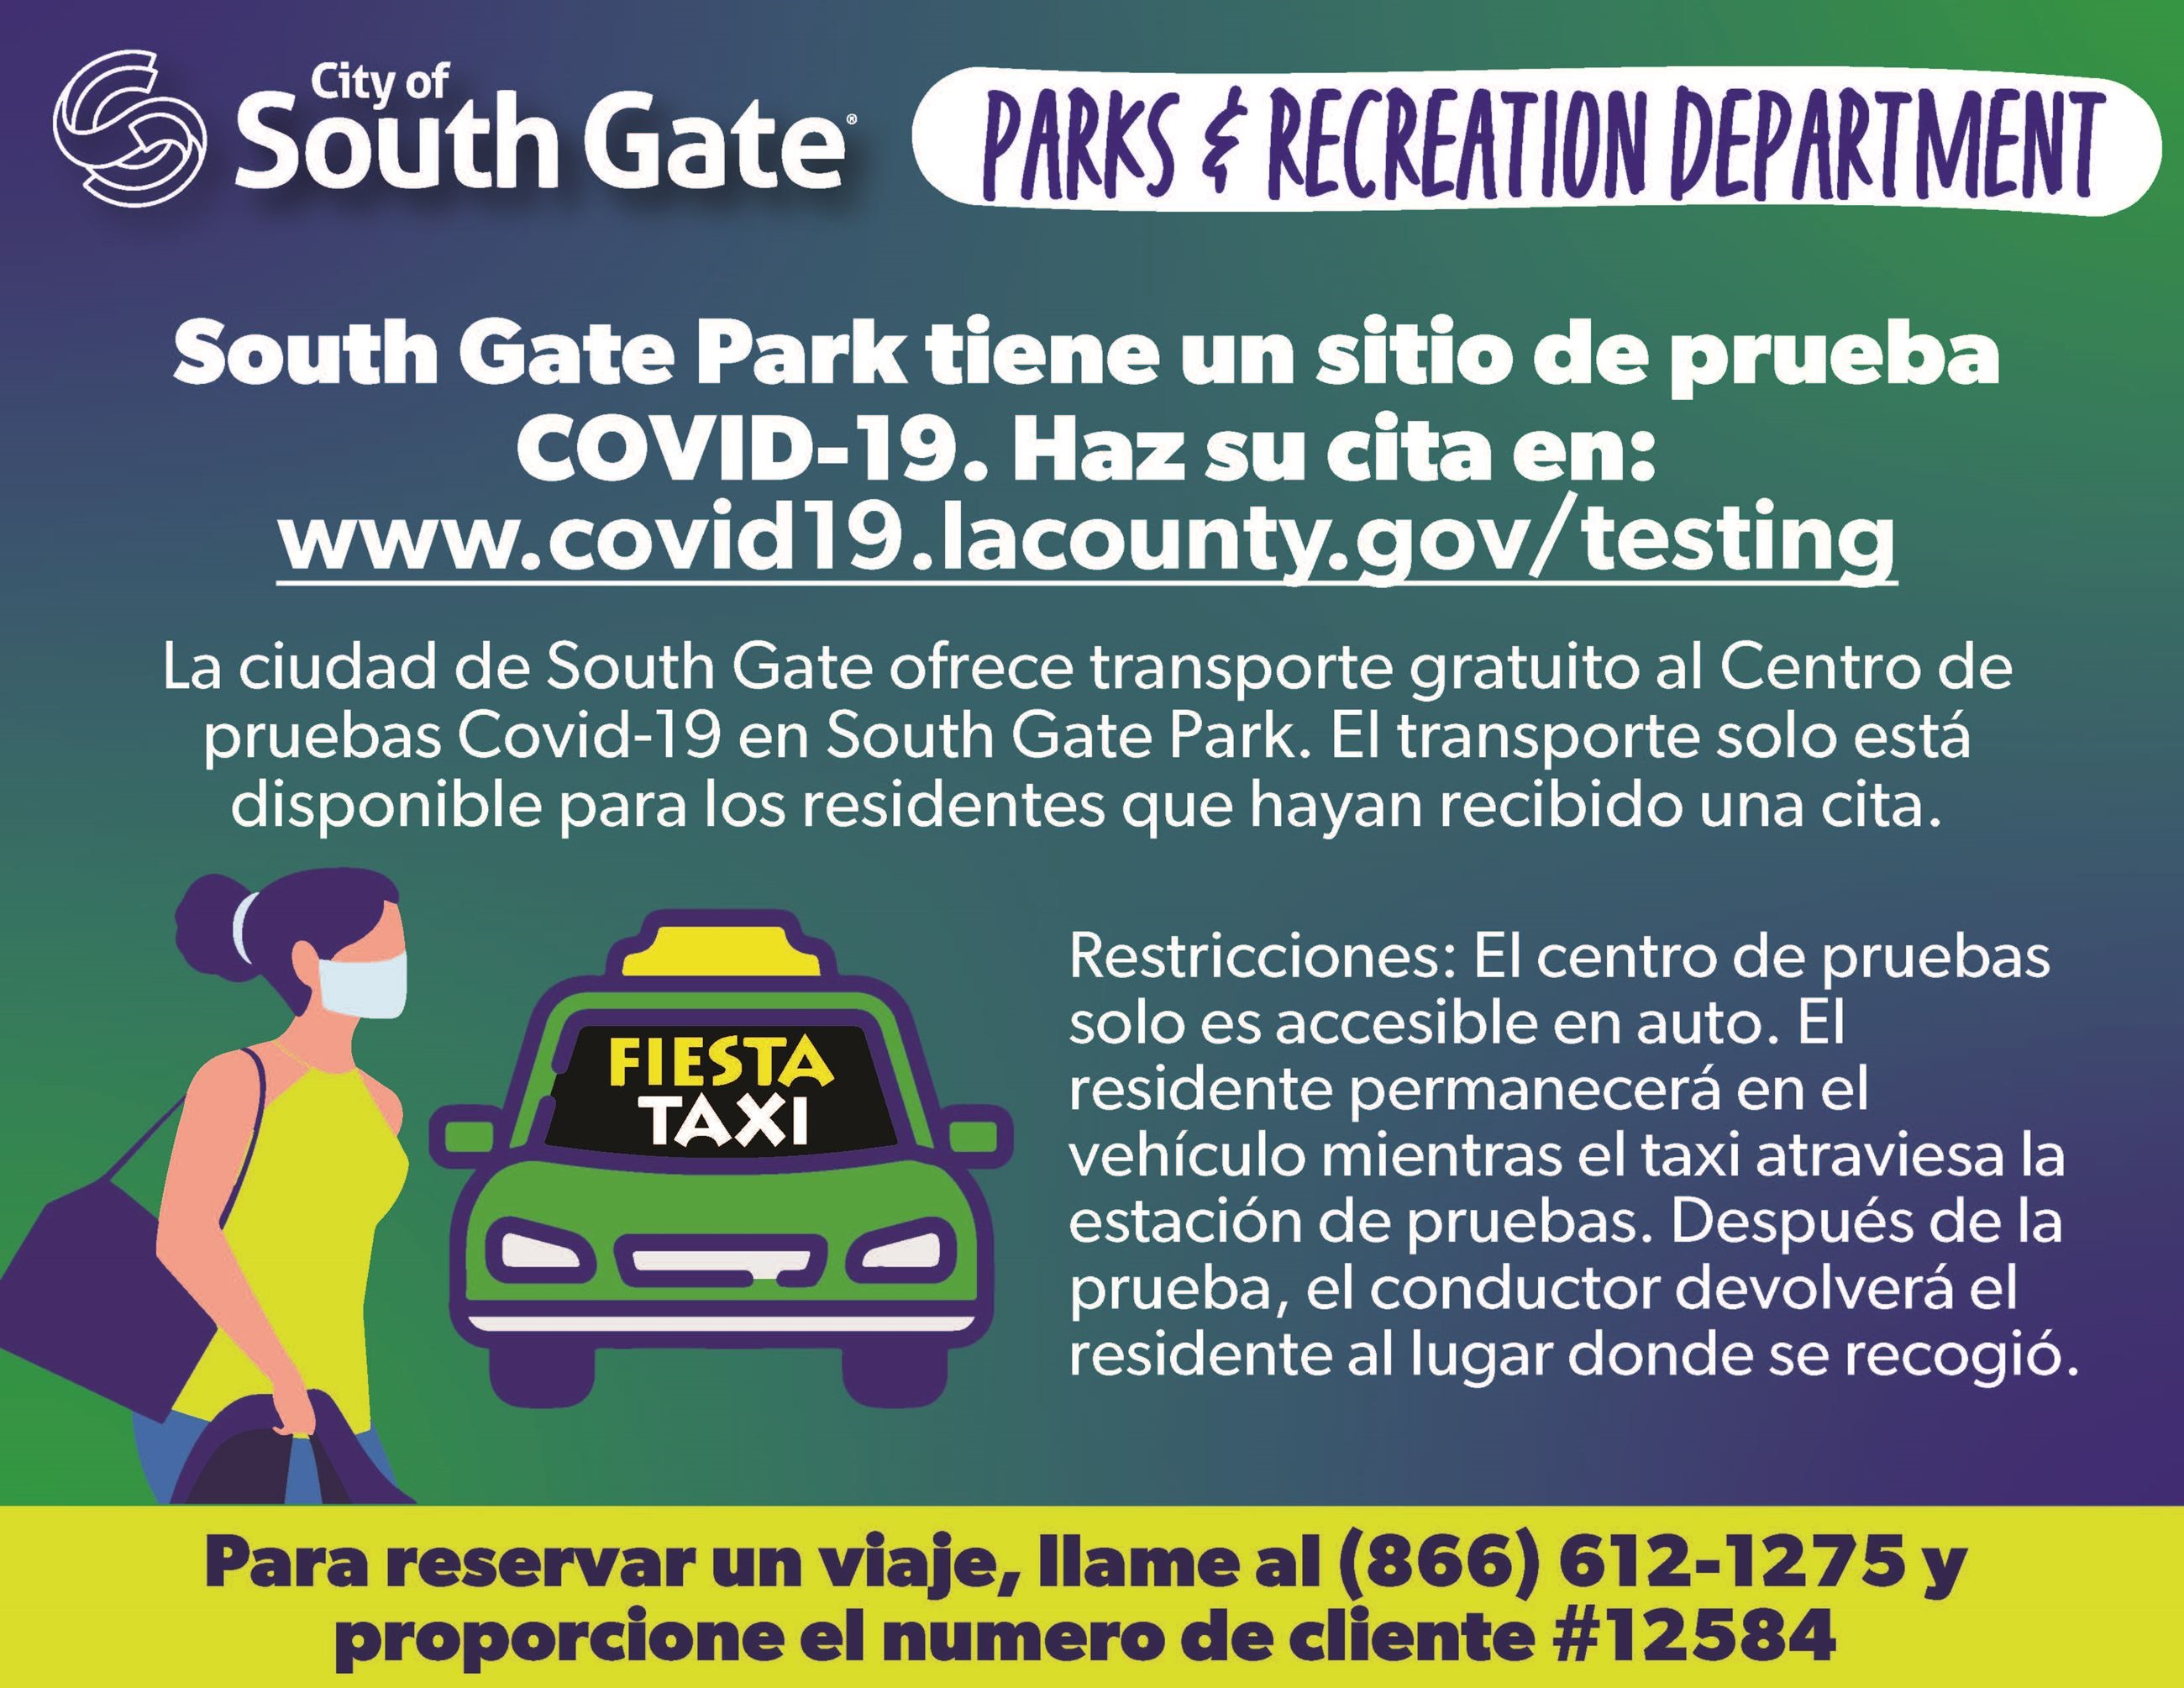 Covid testing booking information in Spanish